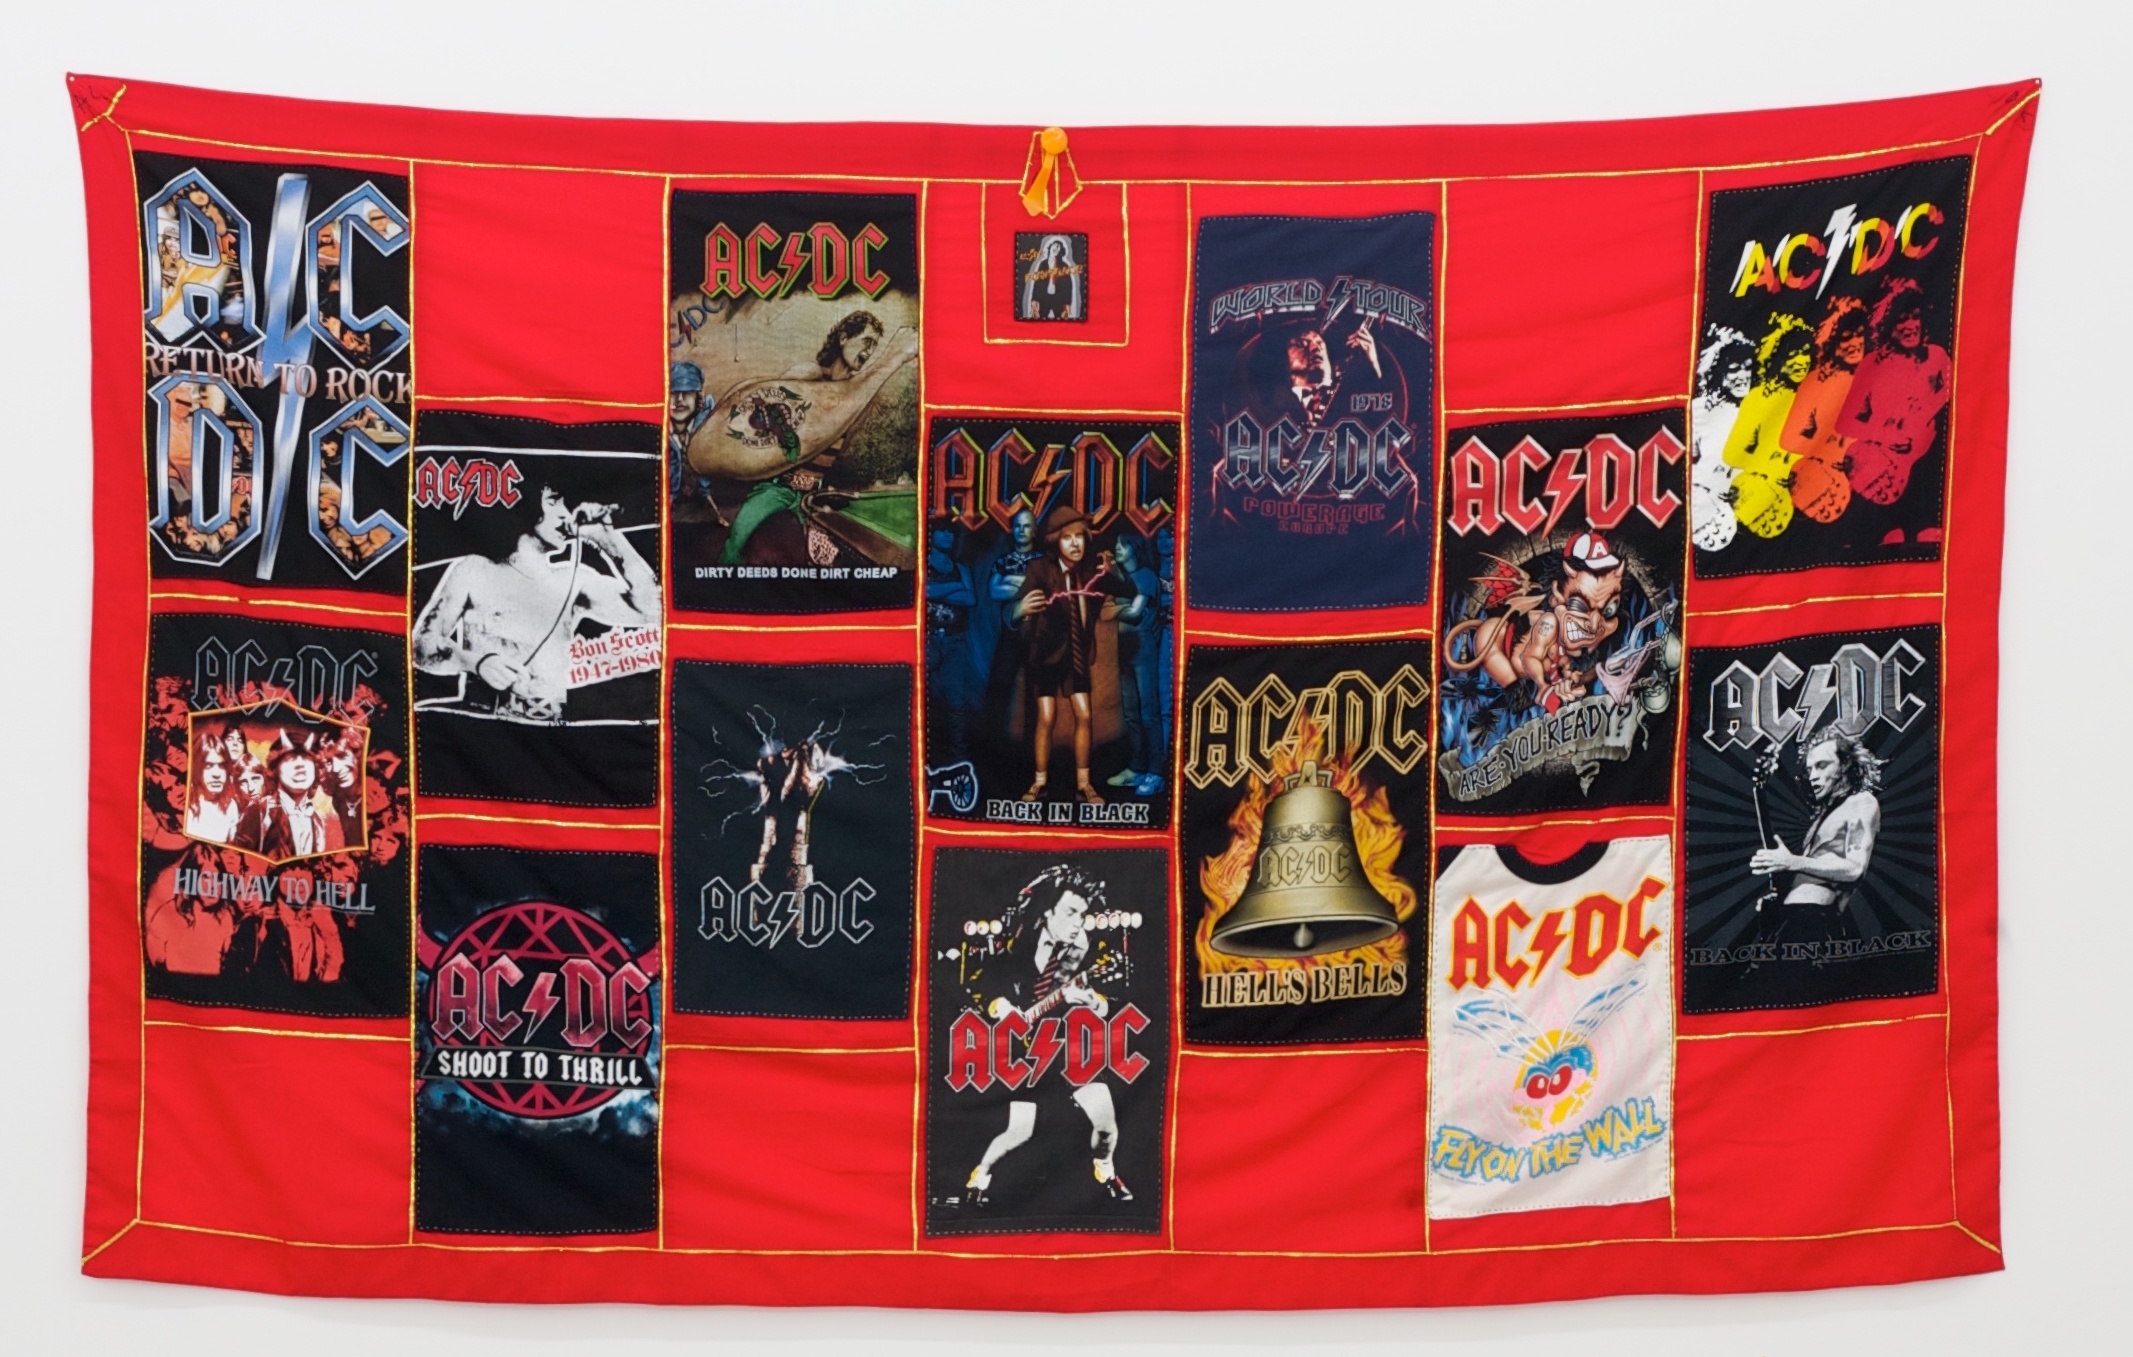 ACDC Altar Cloth (from Chanting with Amps), 2012